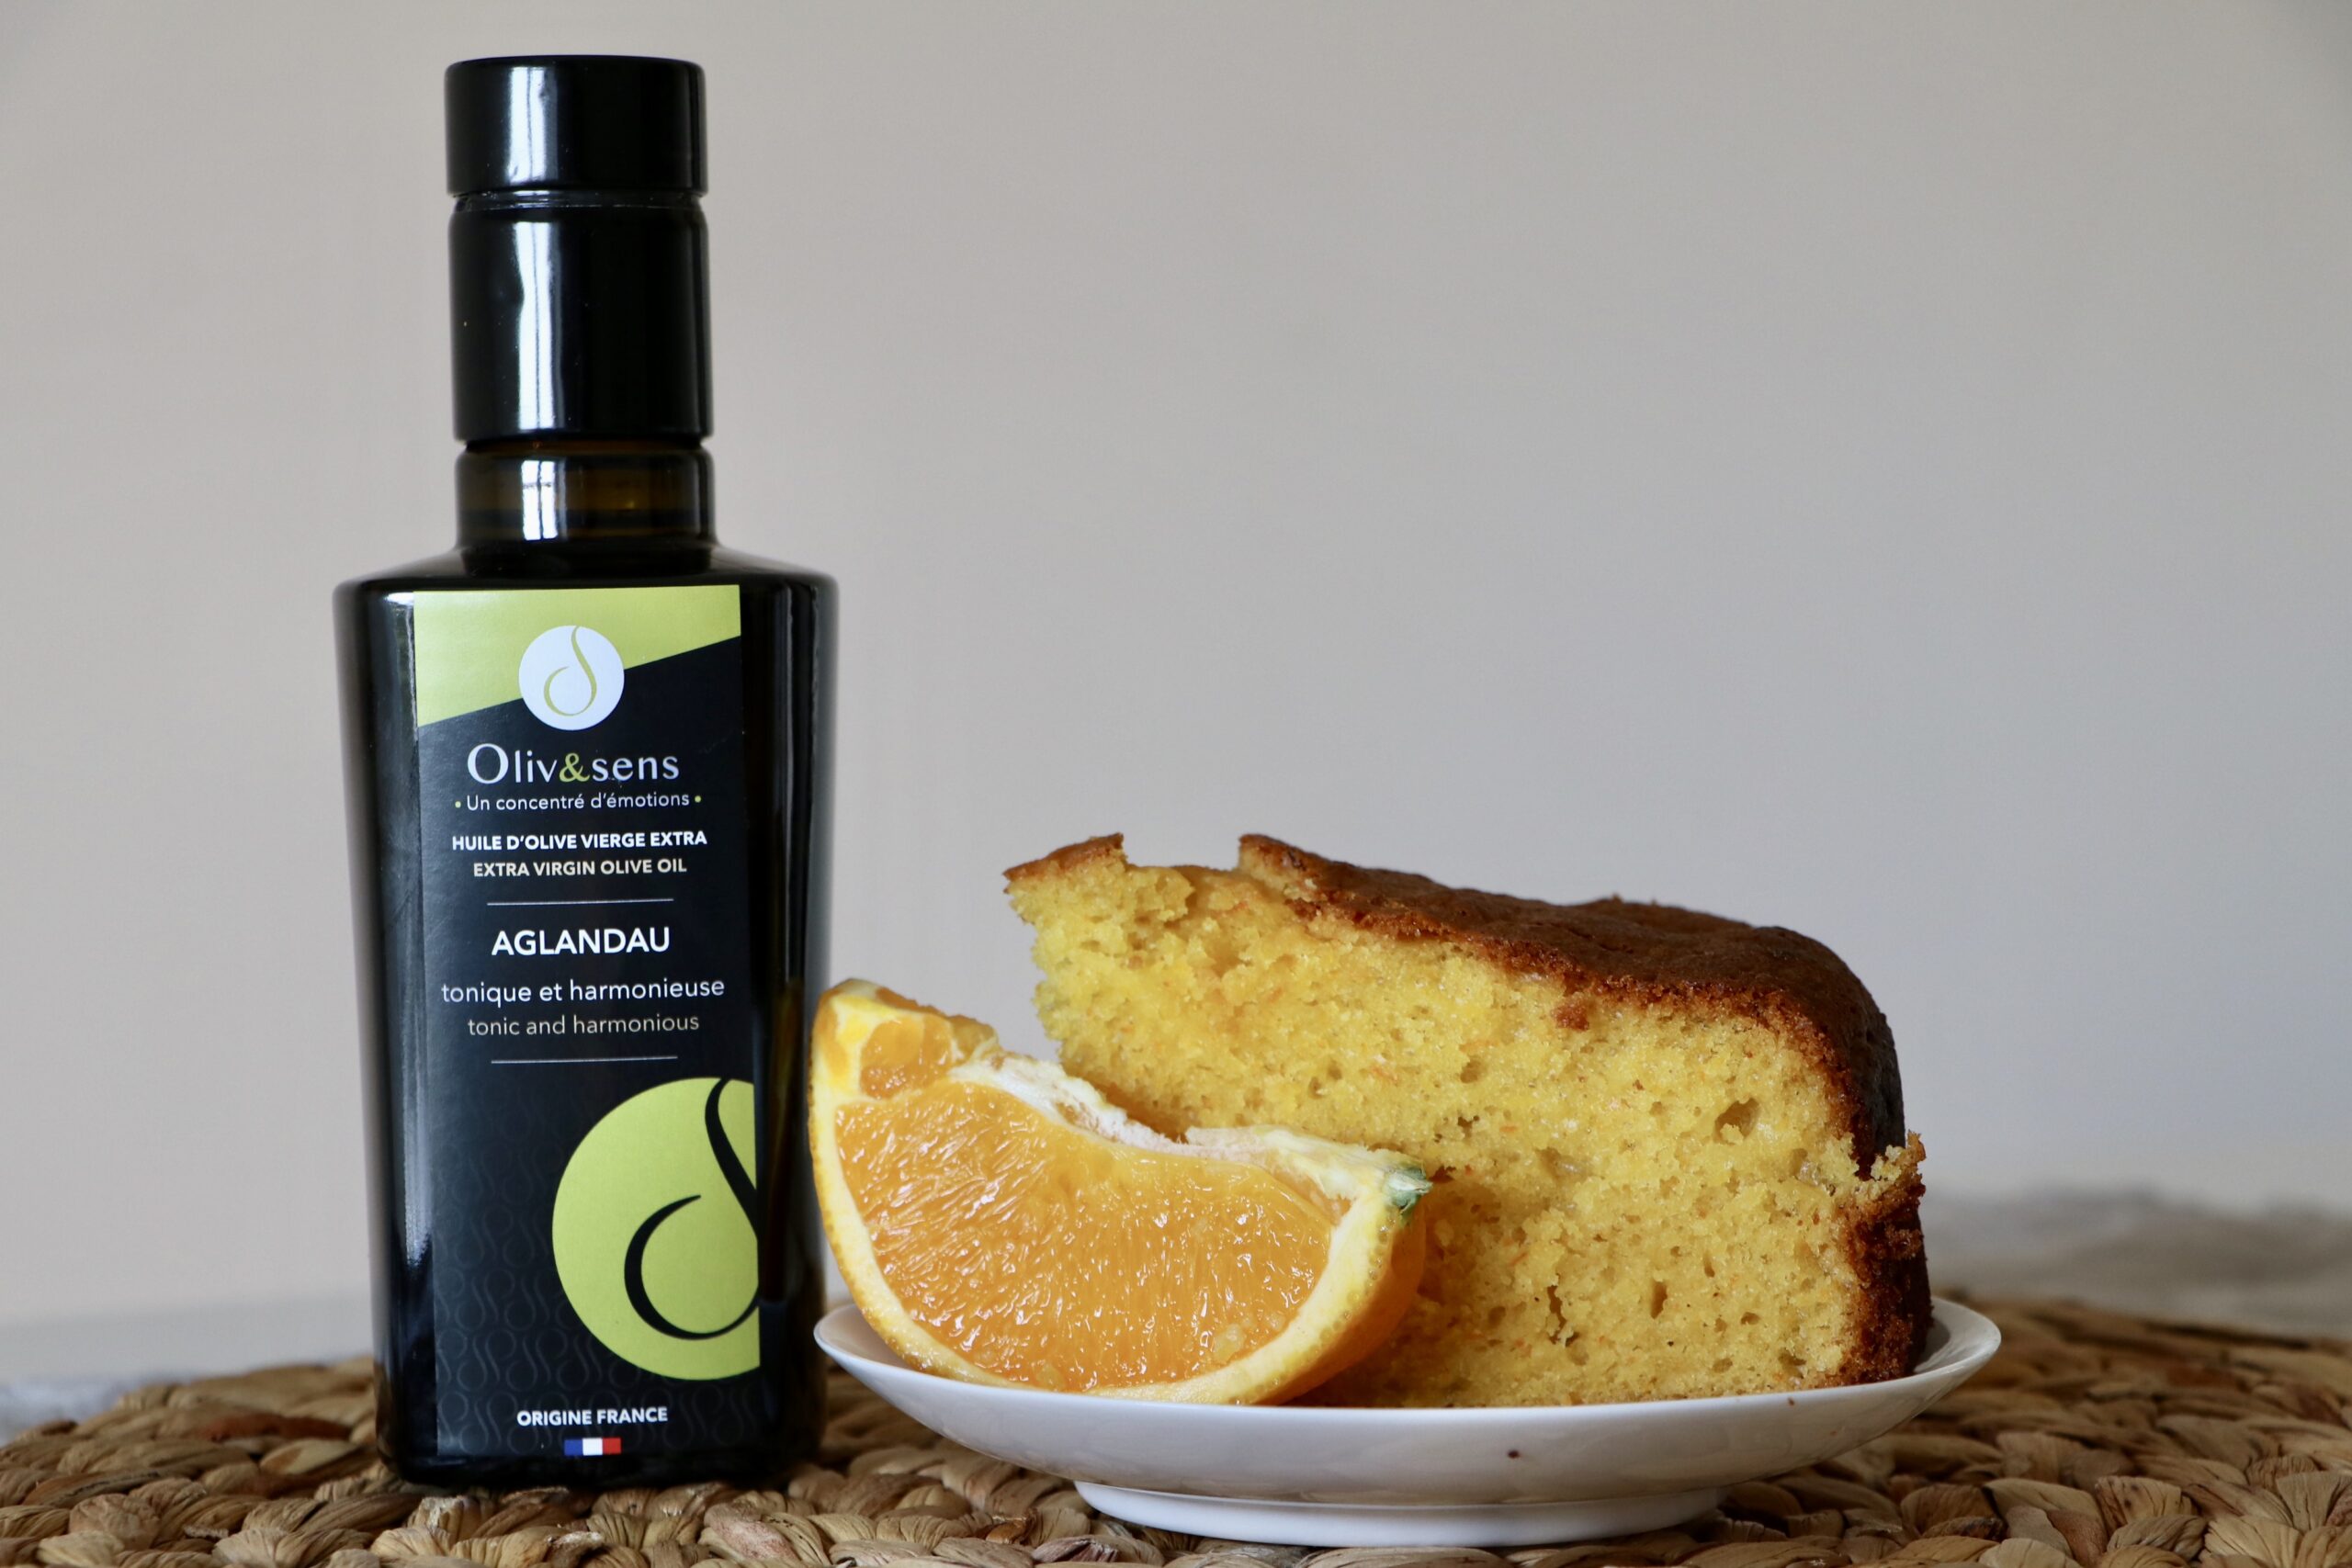 Recipe of the month - Orange and olive oil cake